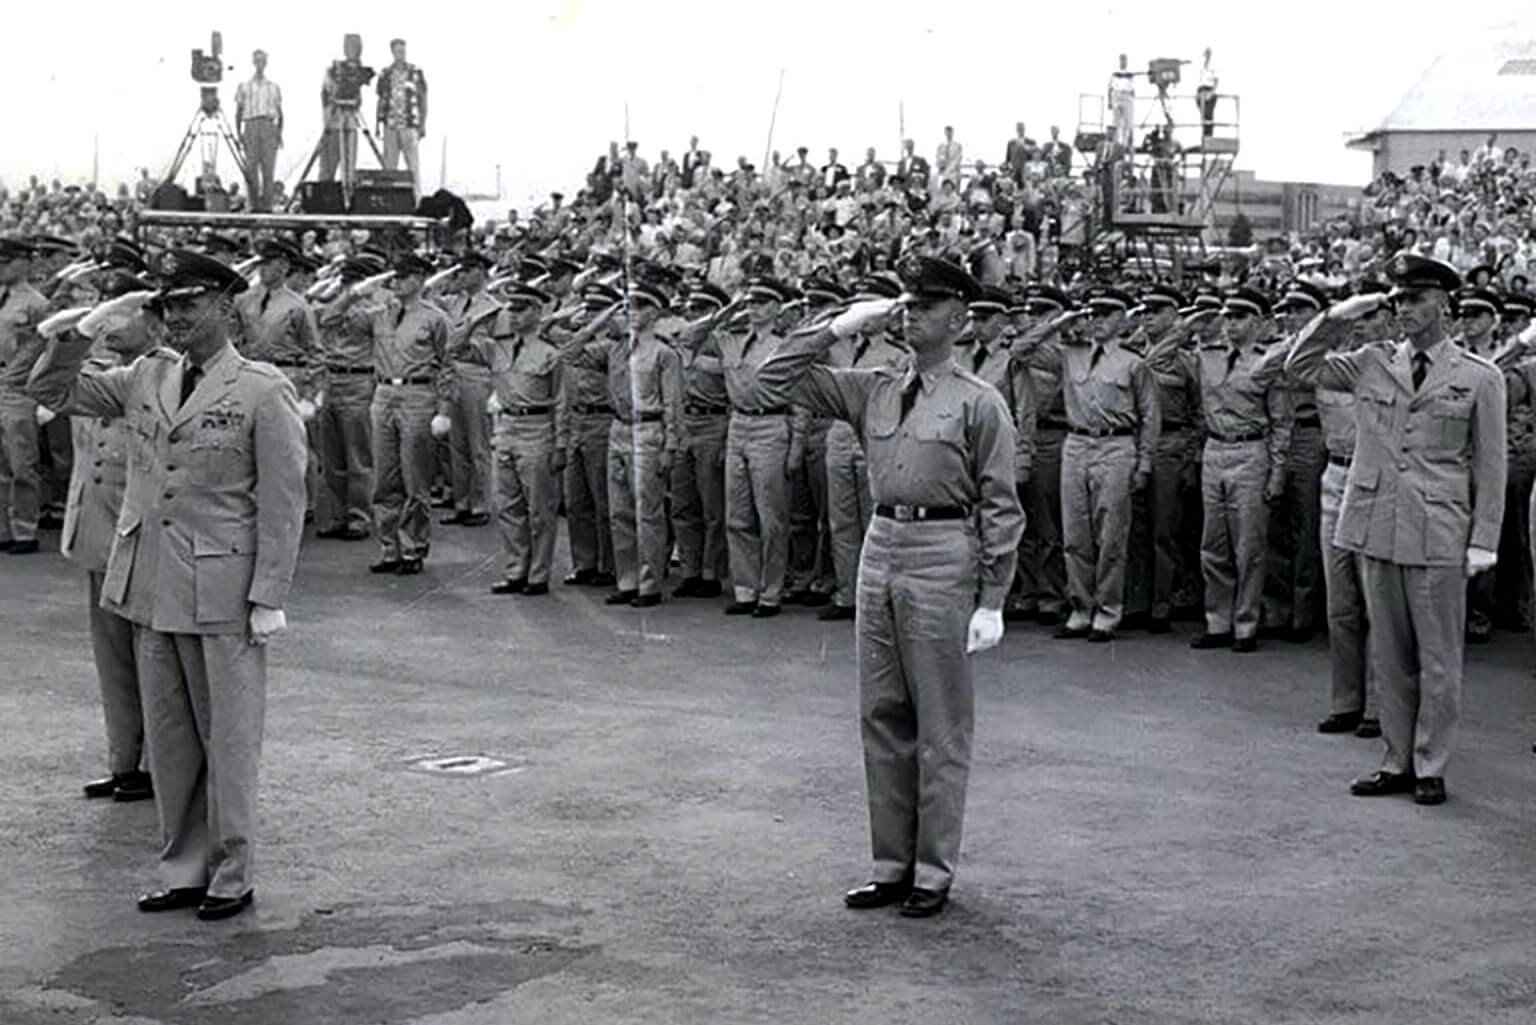 The first U.S. Air Force Academy class is sworn in July 11, 1955 at Lowry Air Force Base, Colo.